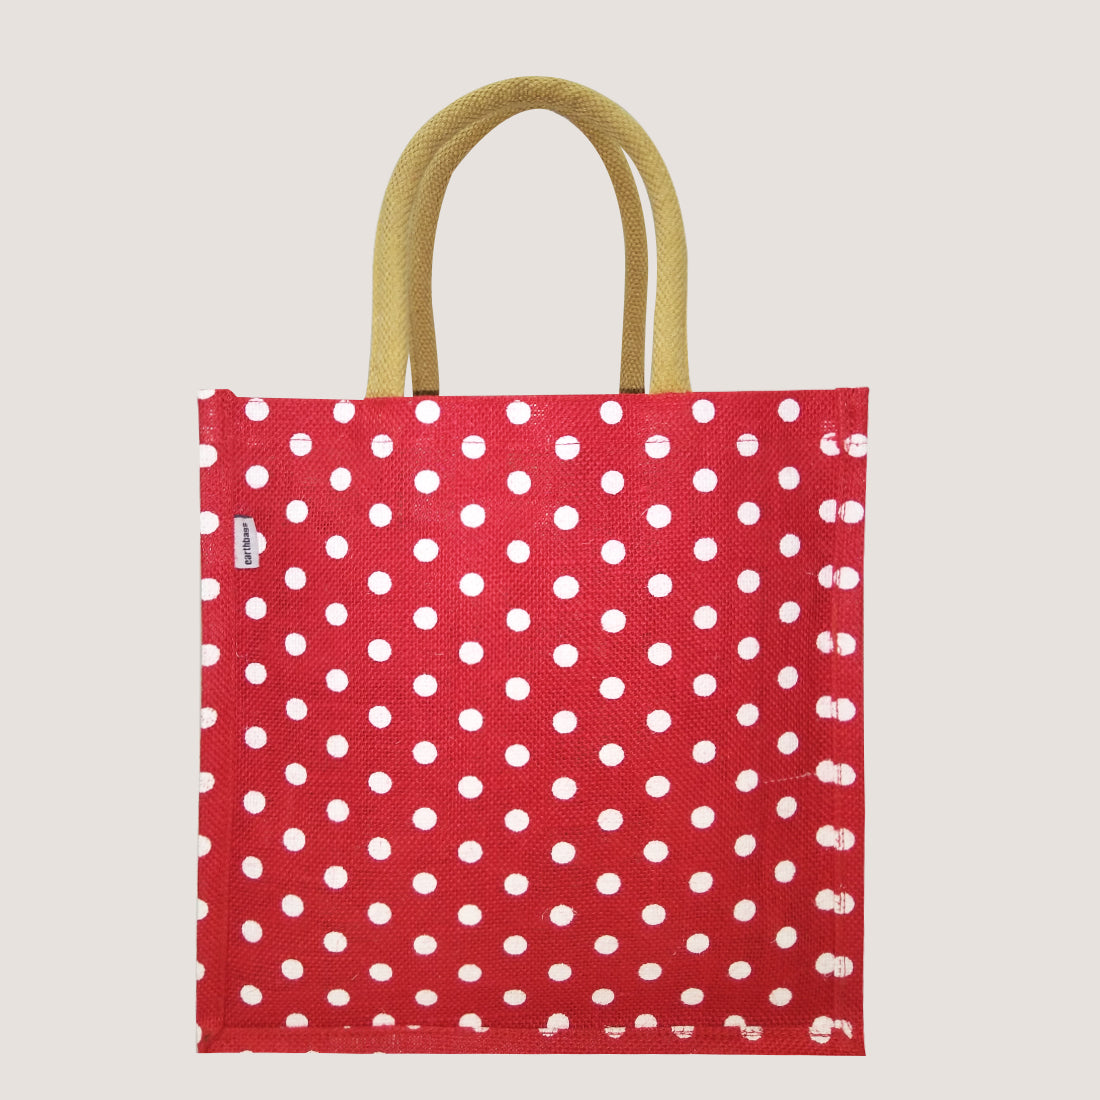 EARTHBAGS POLKA DOT LUNCH BAG WITH PADDED HANDLES